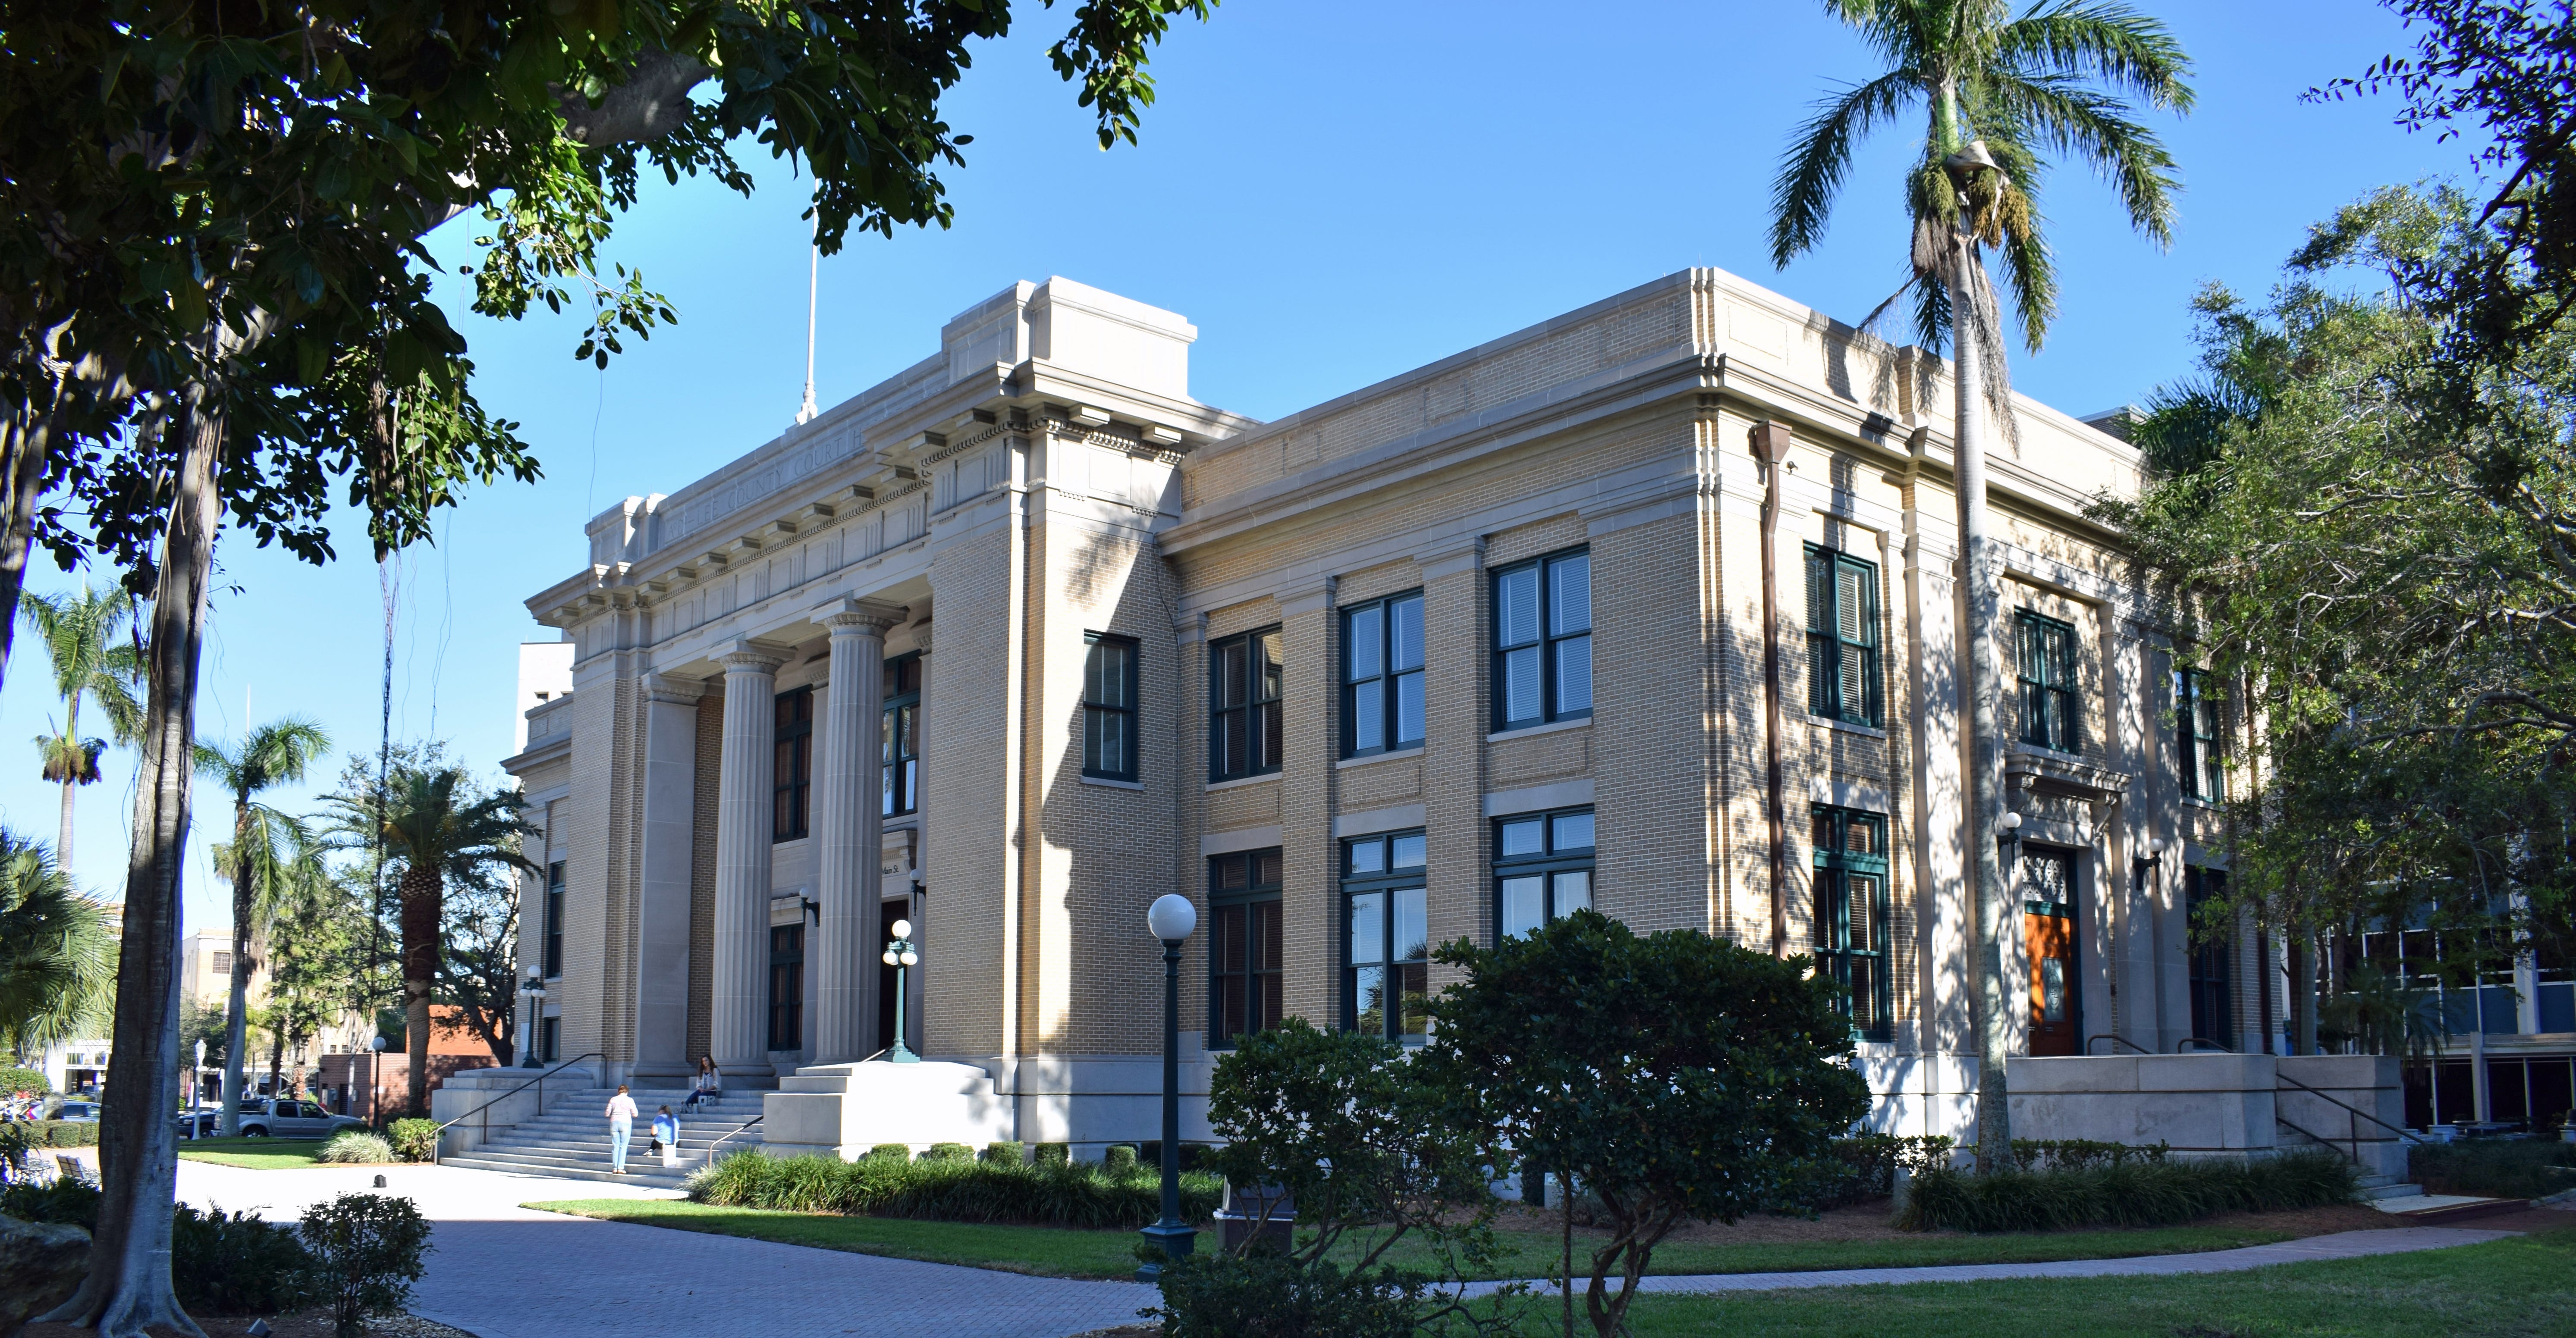 FLORIDA BUILDINGS I LOVE: Old Lee County Courthouse, Fort Myers